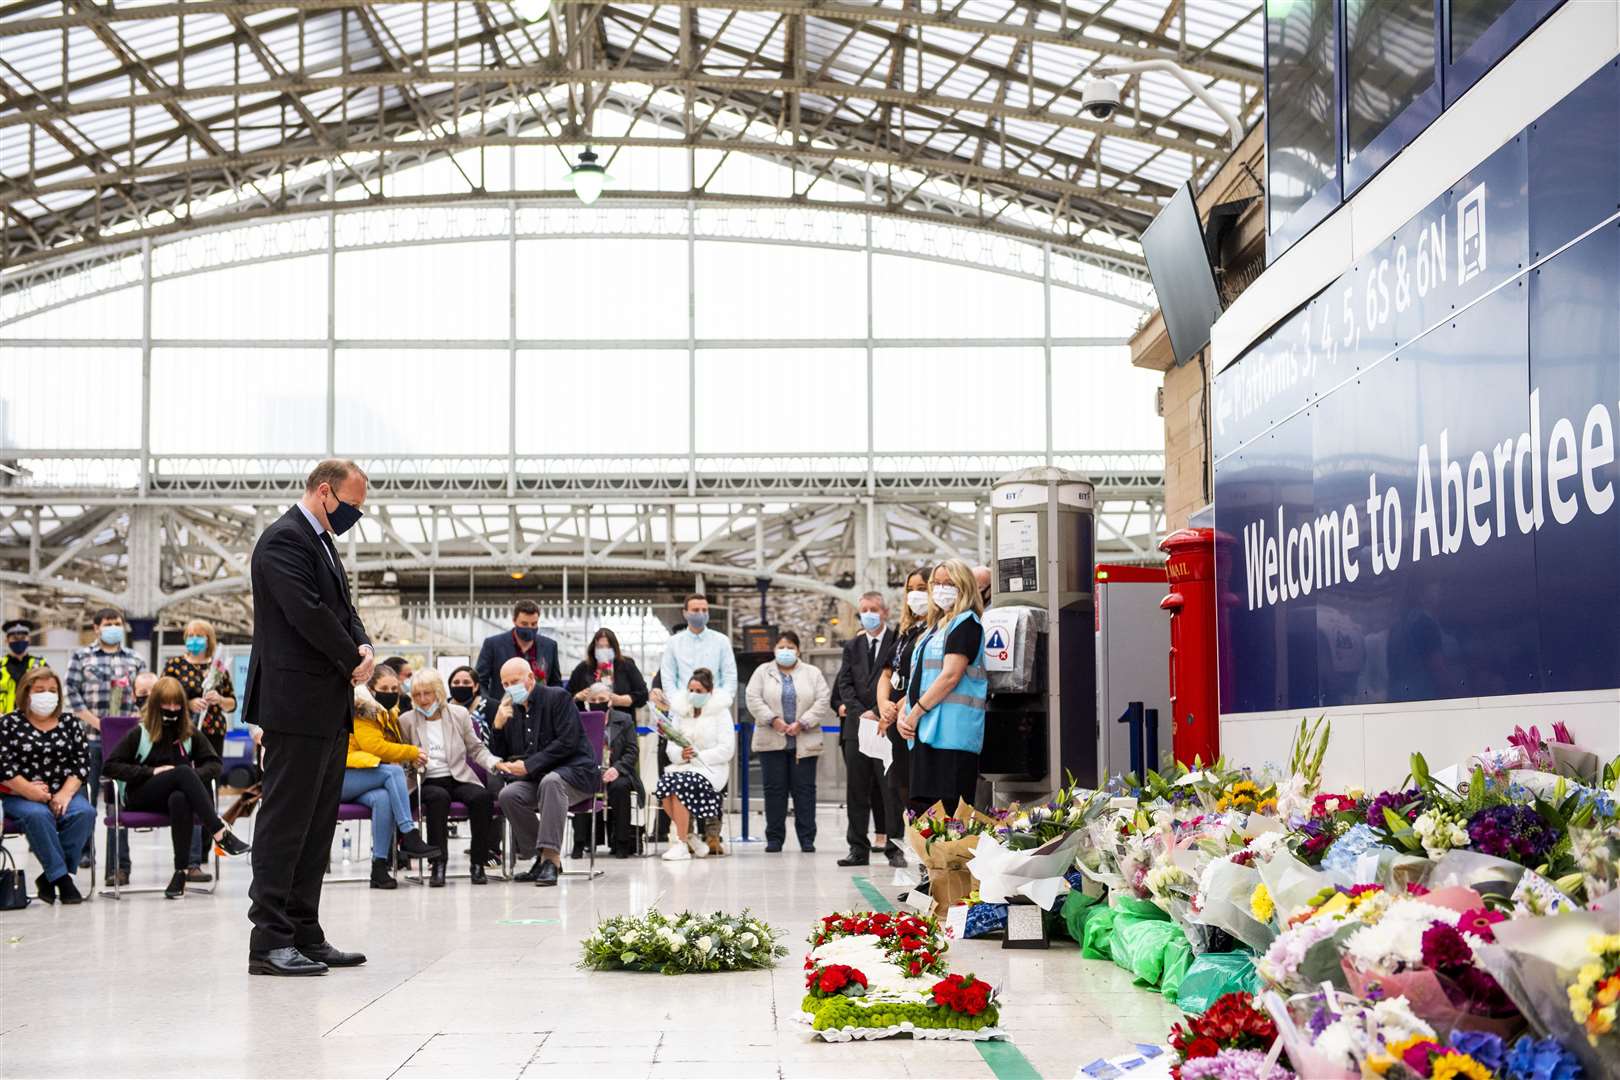 Alex Hynes, Managing Director, Scotland’s Railway lays at wreath at Aberdeen station as the railway remembers those who lost their lives in the Stonehaven derailment last Wednesday. (Credit: ScotRail / SNS).